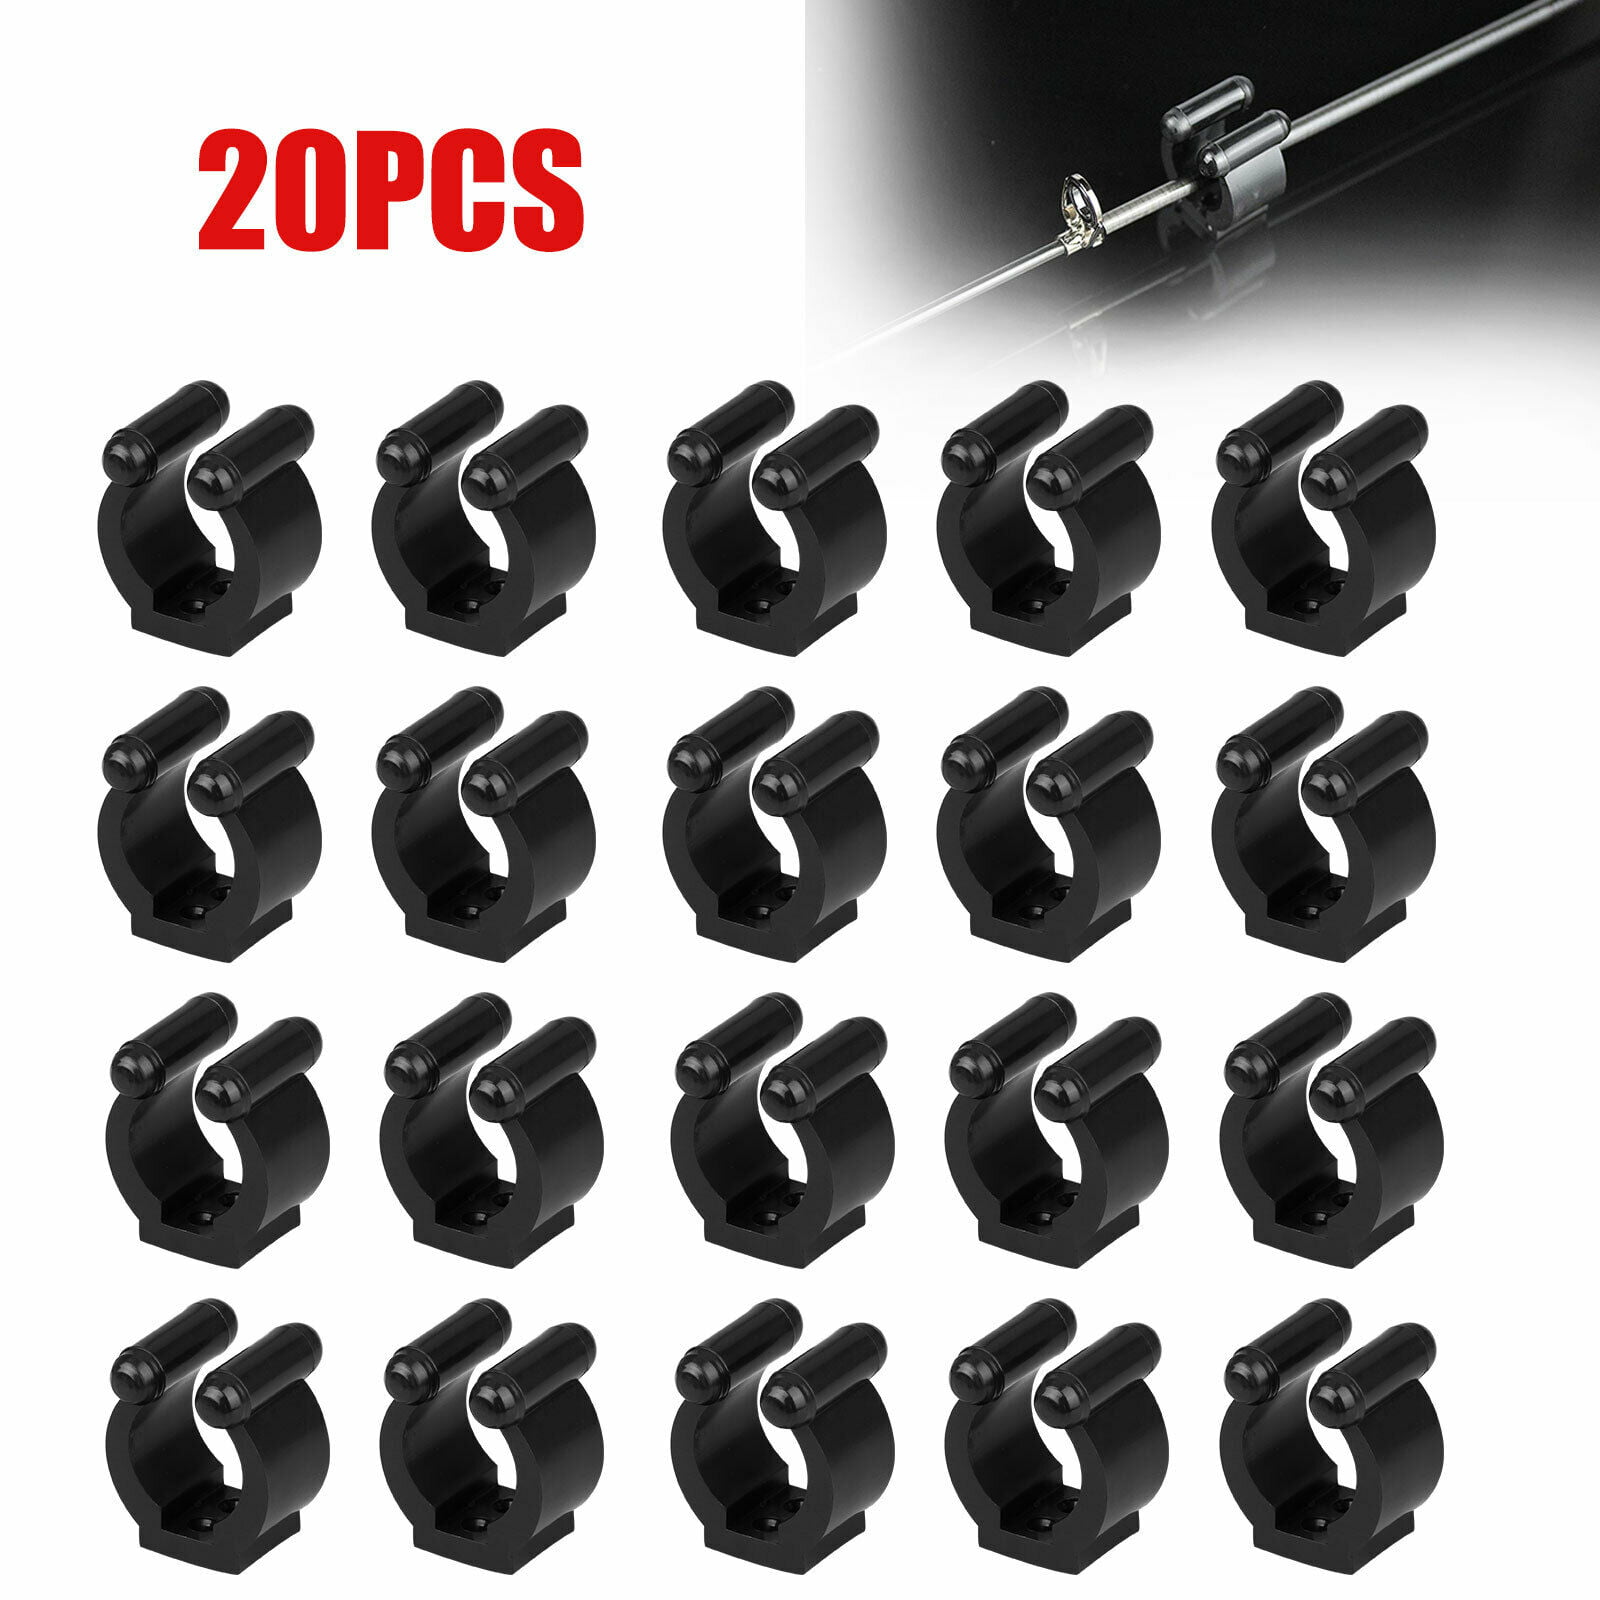 20 40 standard fishing pole storage tip clips clamps rod holders with screws